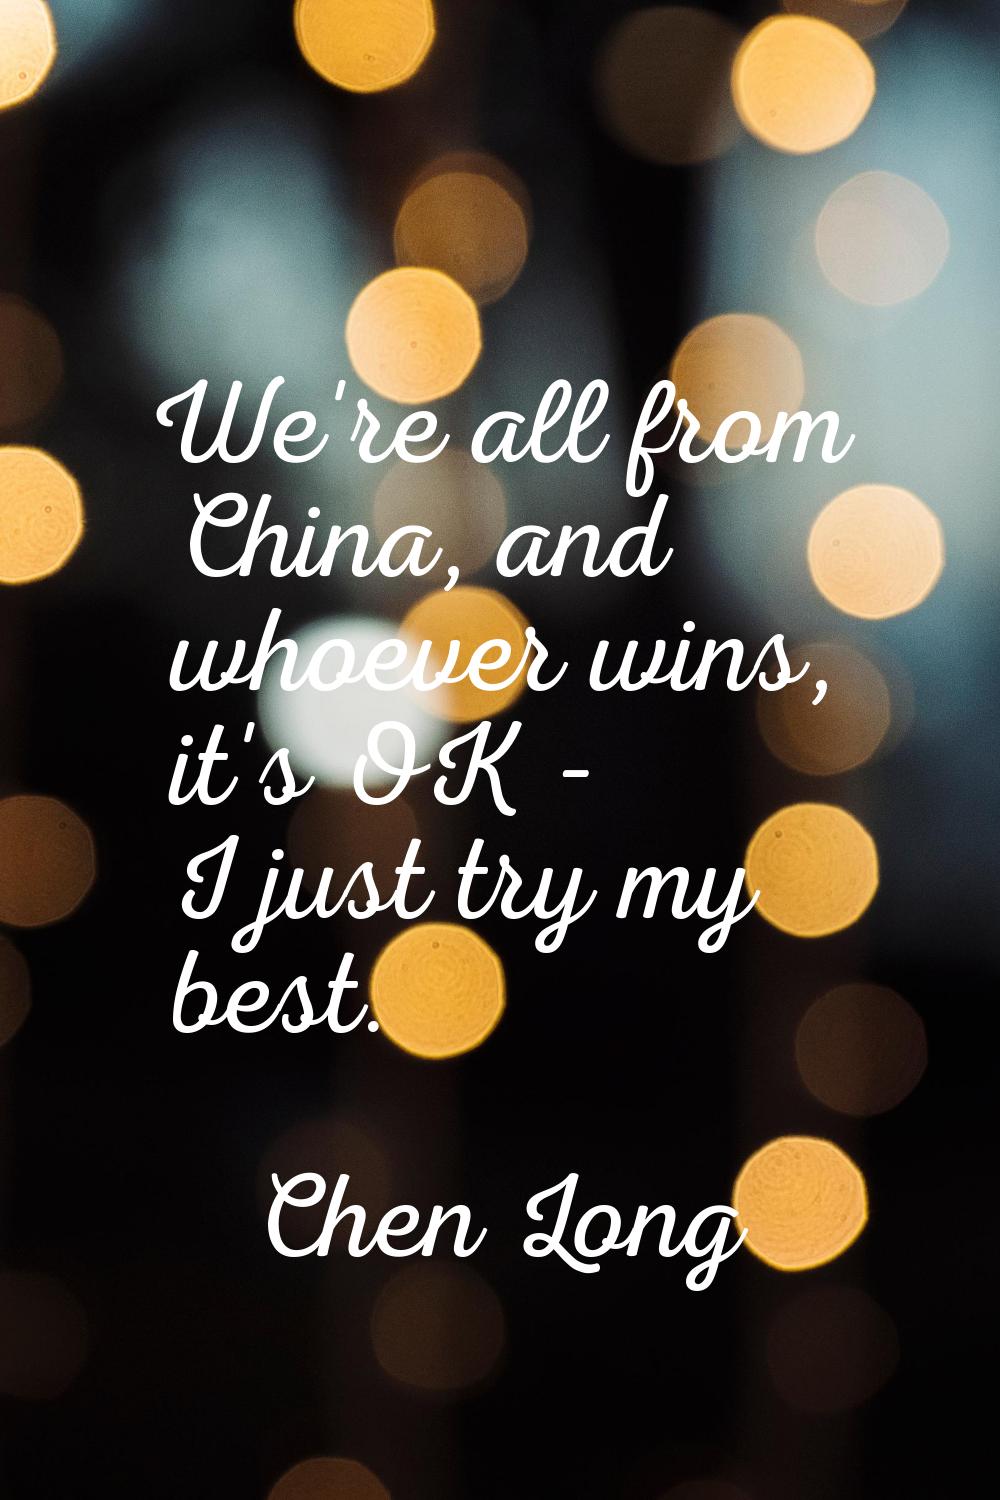 We're all from China, and whoever wins, it's OK - I just try my best.